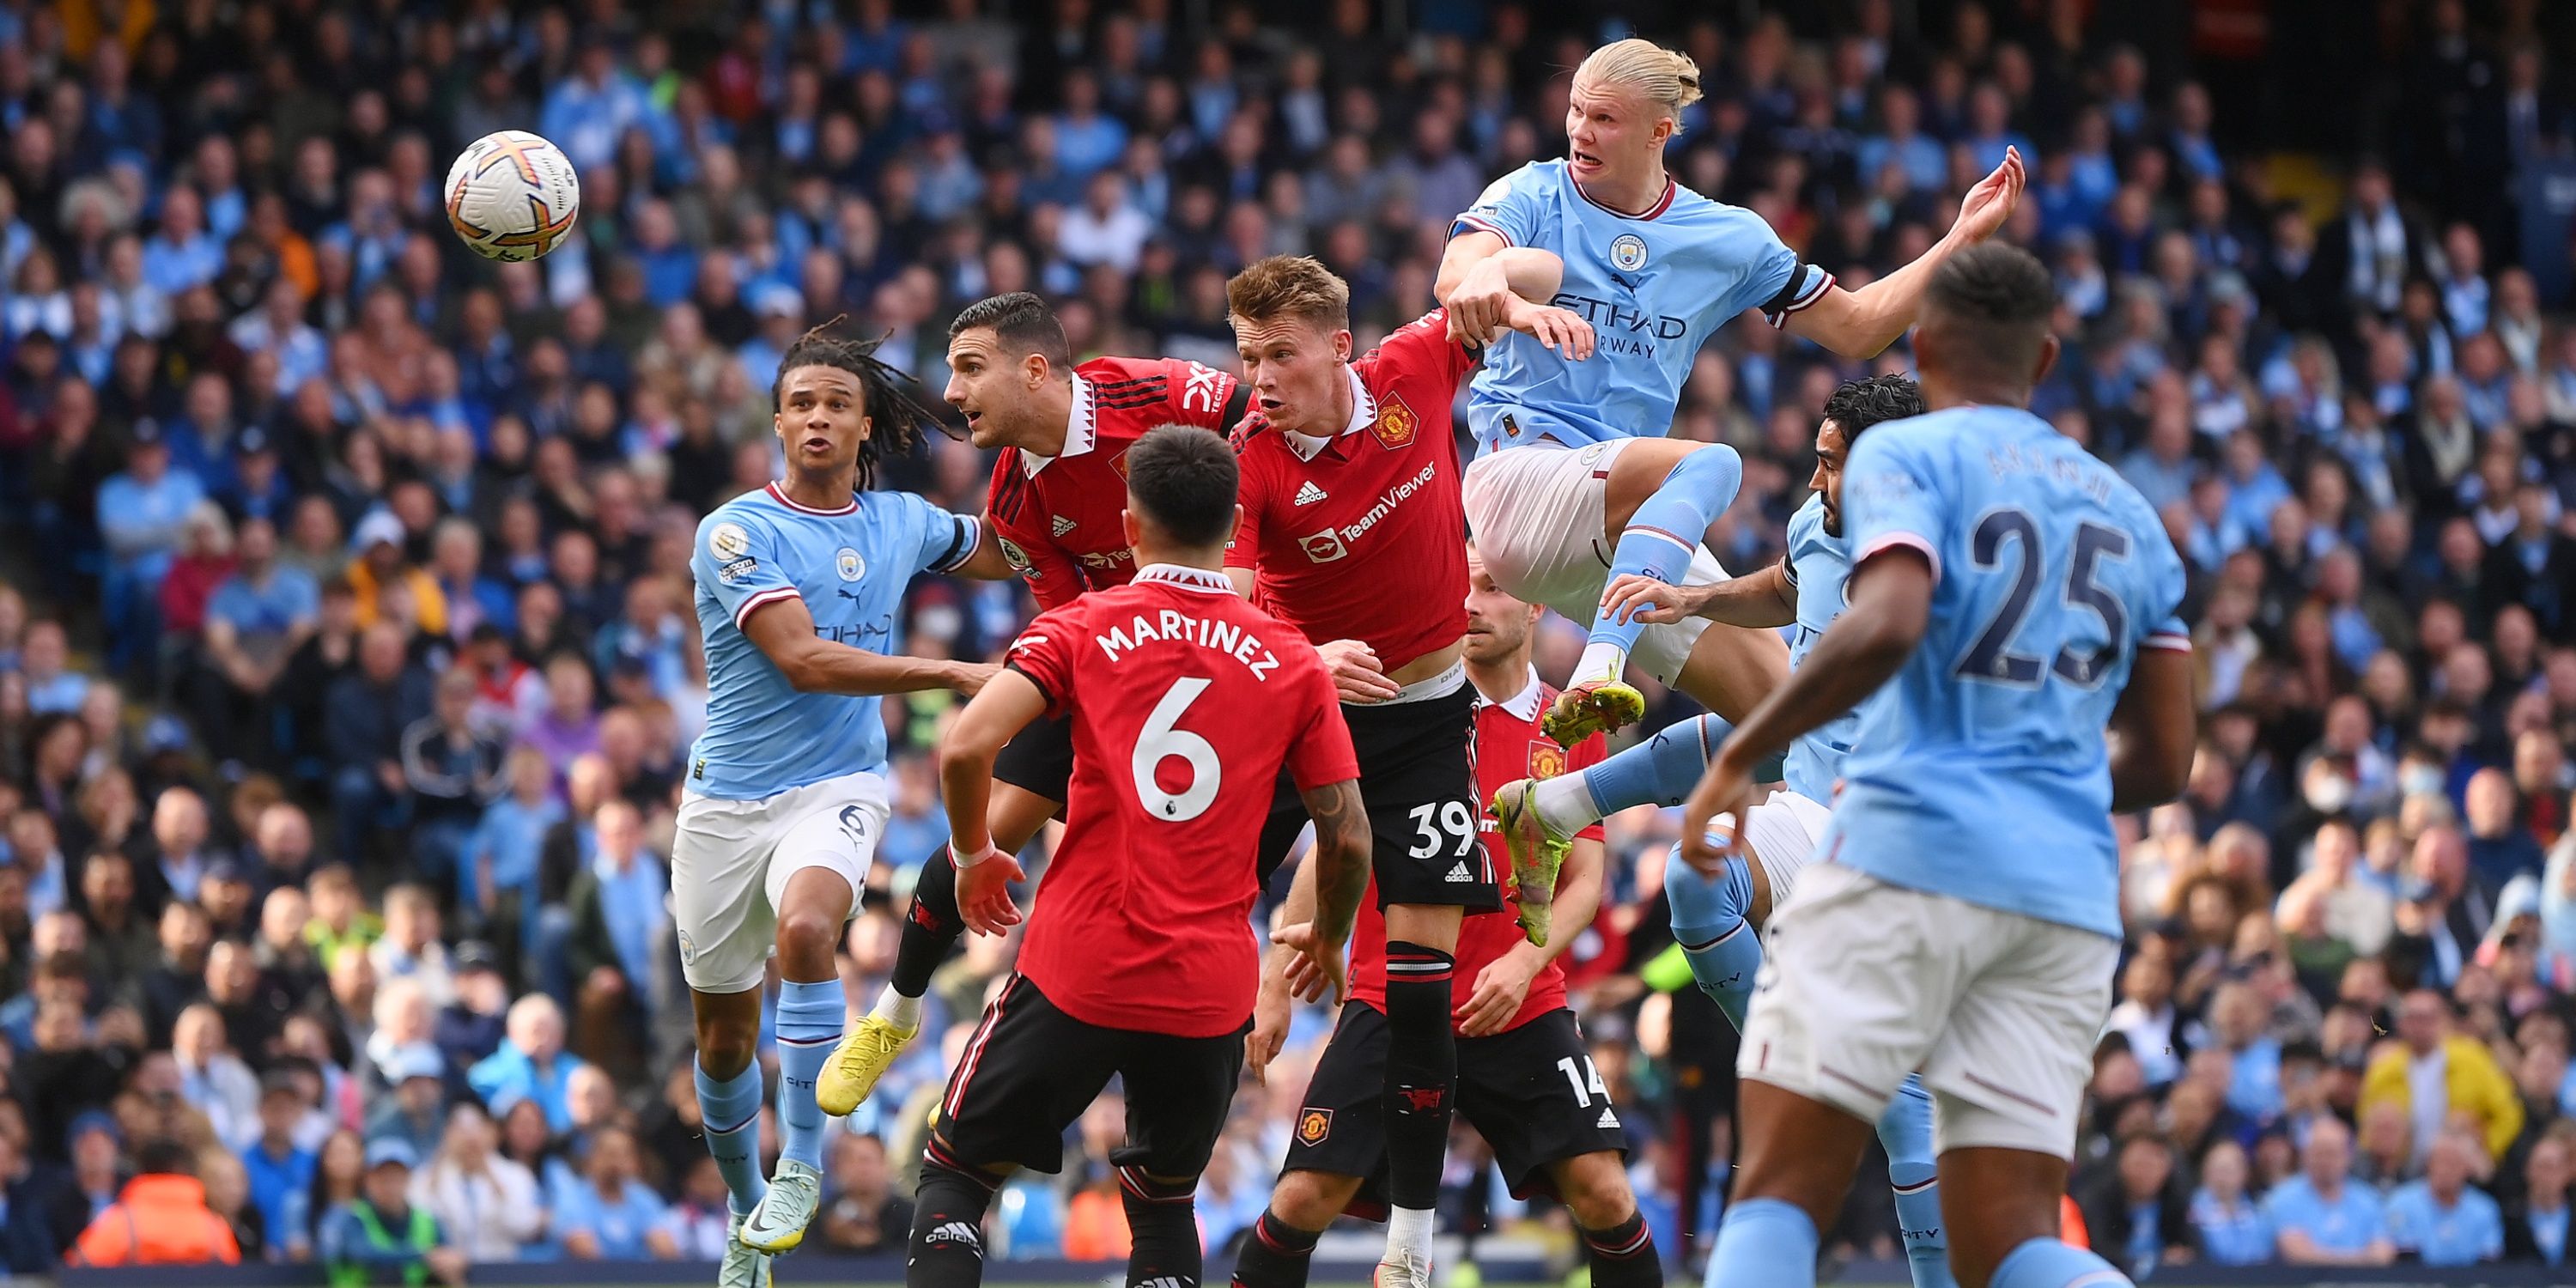 Manchester City and Manchester United players at the Etihad.